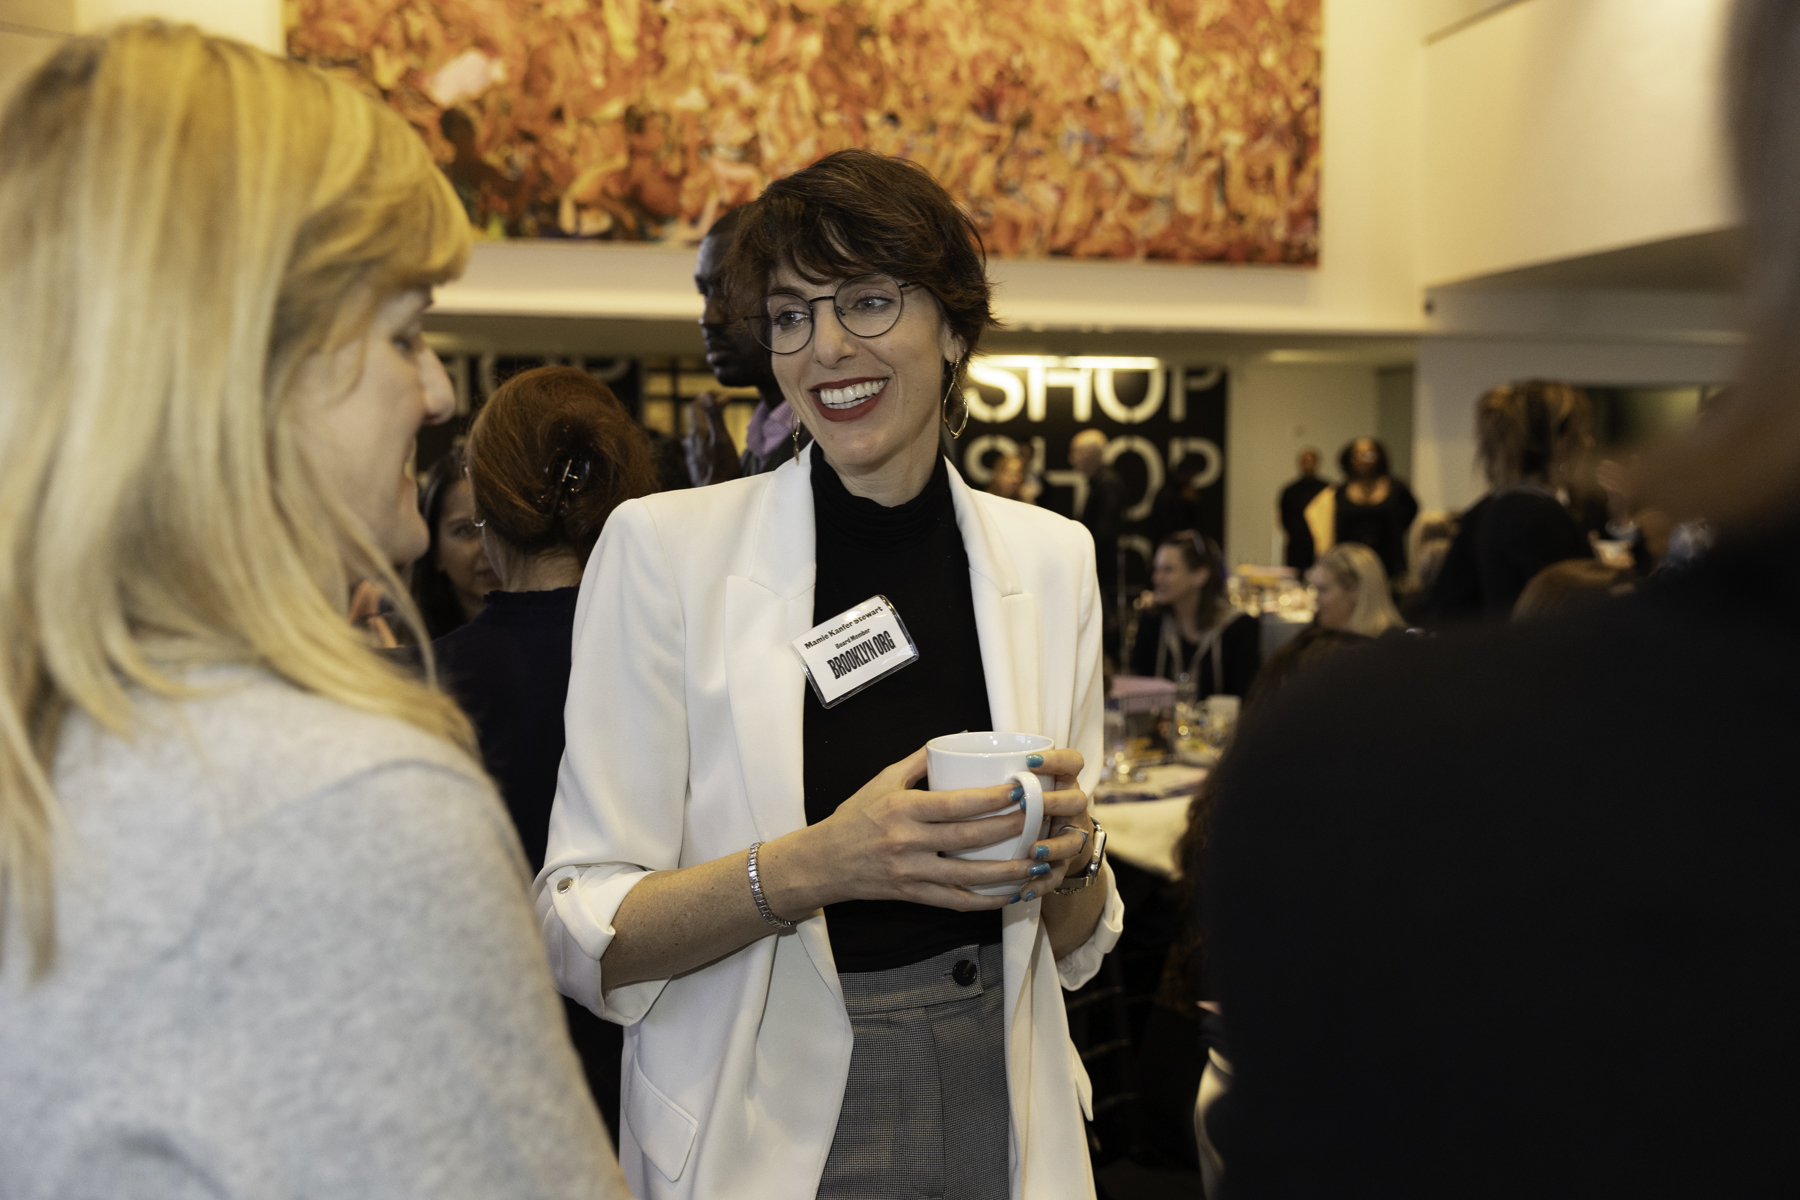 A woman with a name tag holds a coffee cup while smiling and conversing with others at a social event.